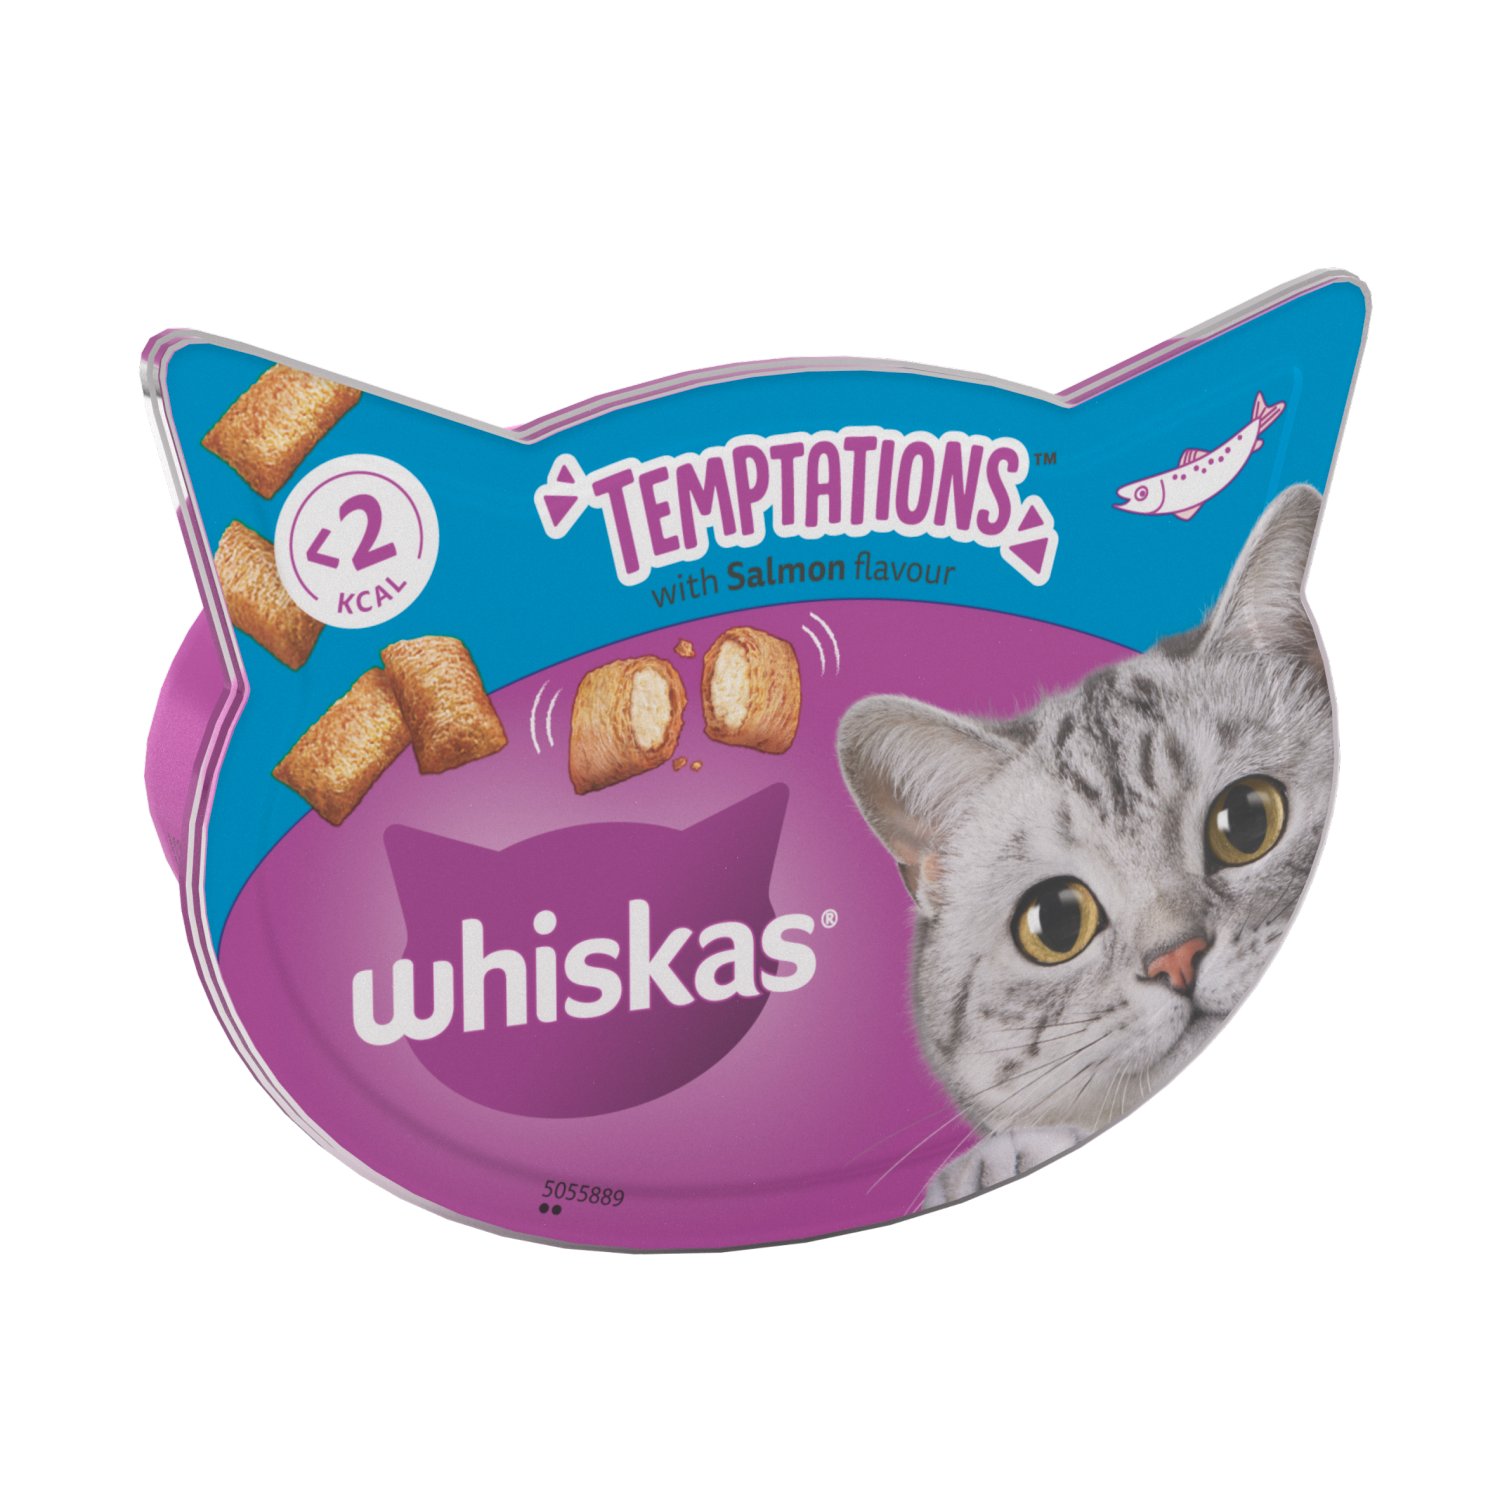 Whiskas Temptations are delicious dual-textured cat treats - tasty, crunchy shells filled with a scrumptiously soft, creamy centre. Each salmon flavour cat treat is less than 2 Kcal and contains a boost of vitamins and minerals for even happier purrs.
Cat treats enriched with vitamins and minerals, because your cat naturally seeks a varied diet.
Tasty salmon flavour cat treats prepared with no artificial flavours.
Cat treats with less than 2 Kcal, supporting a healthy diet.